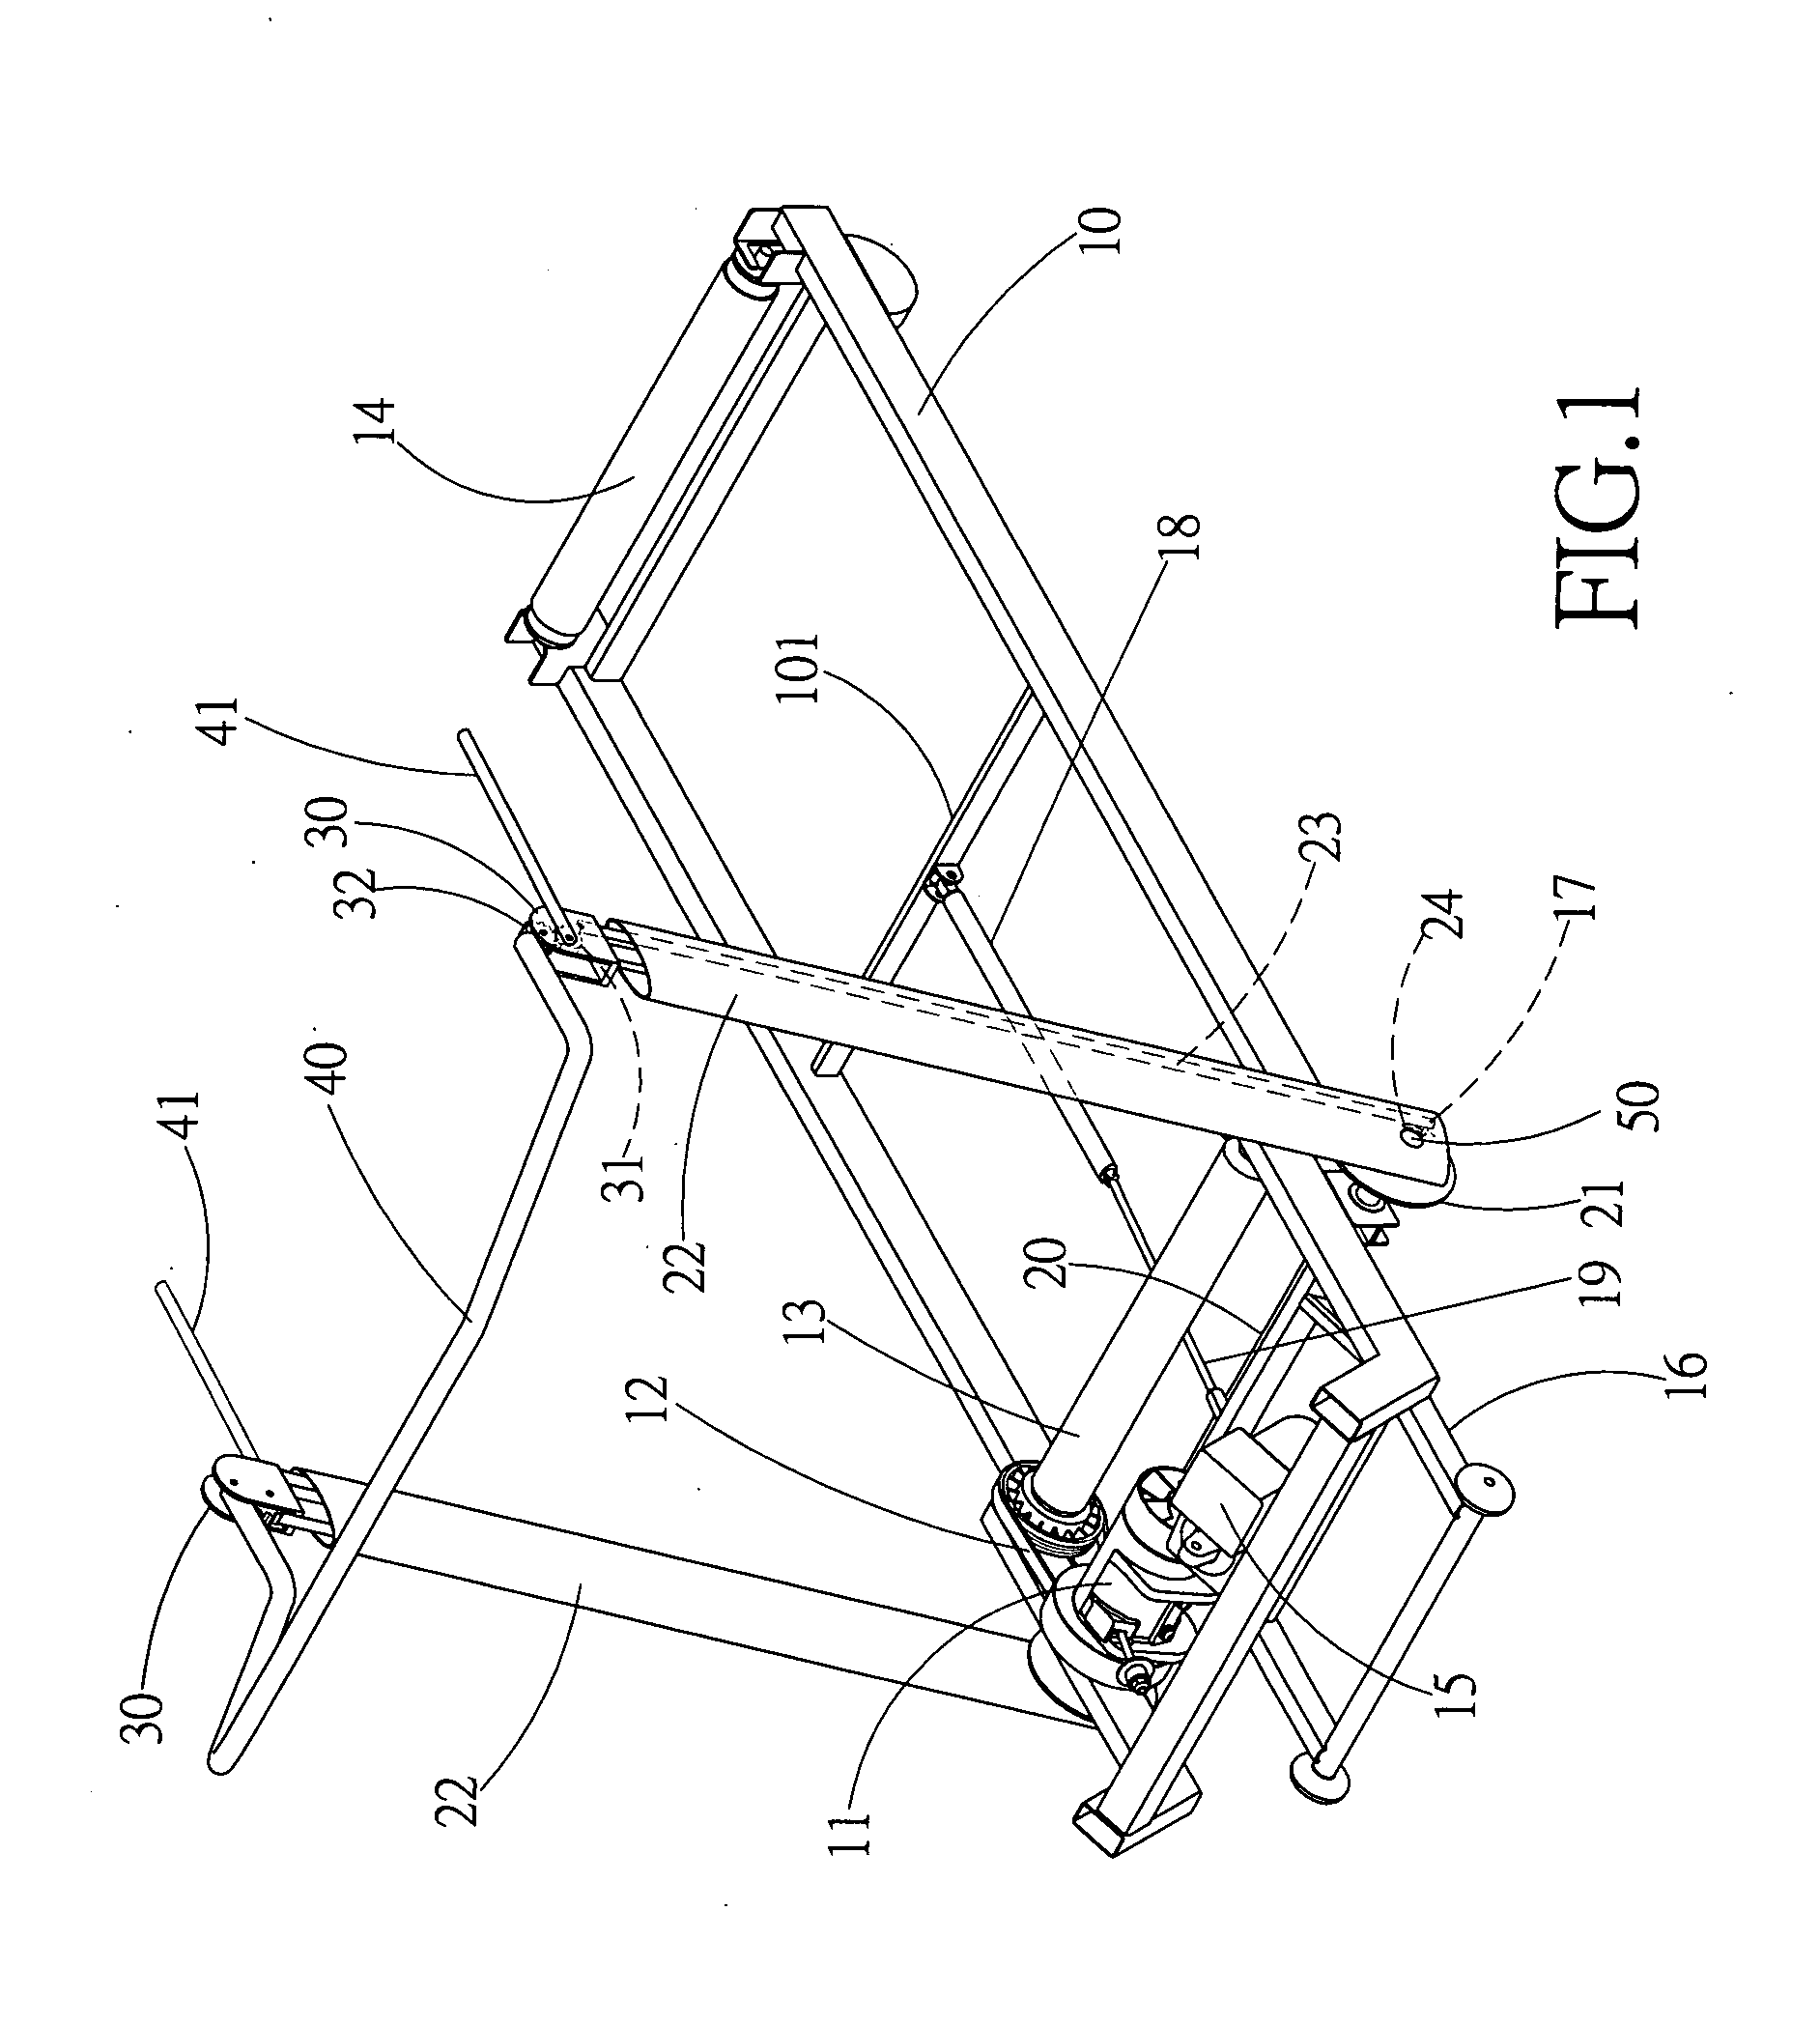 Folding mechanism for a handrail frame assembly of a treadmill